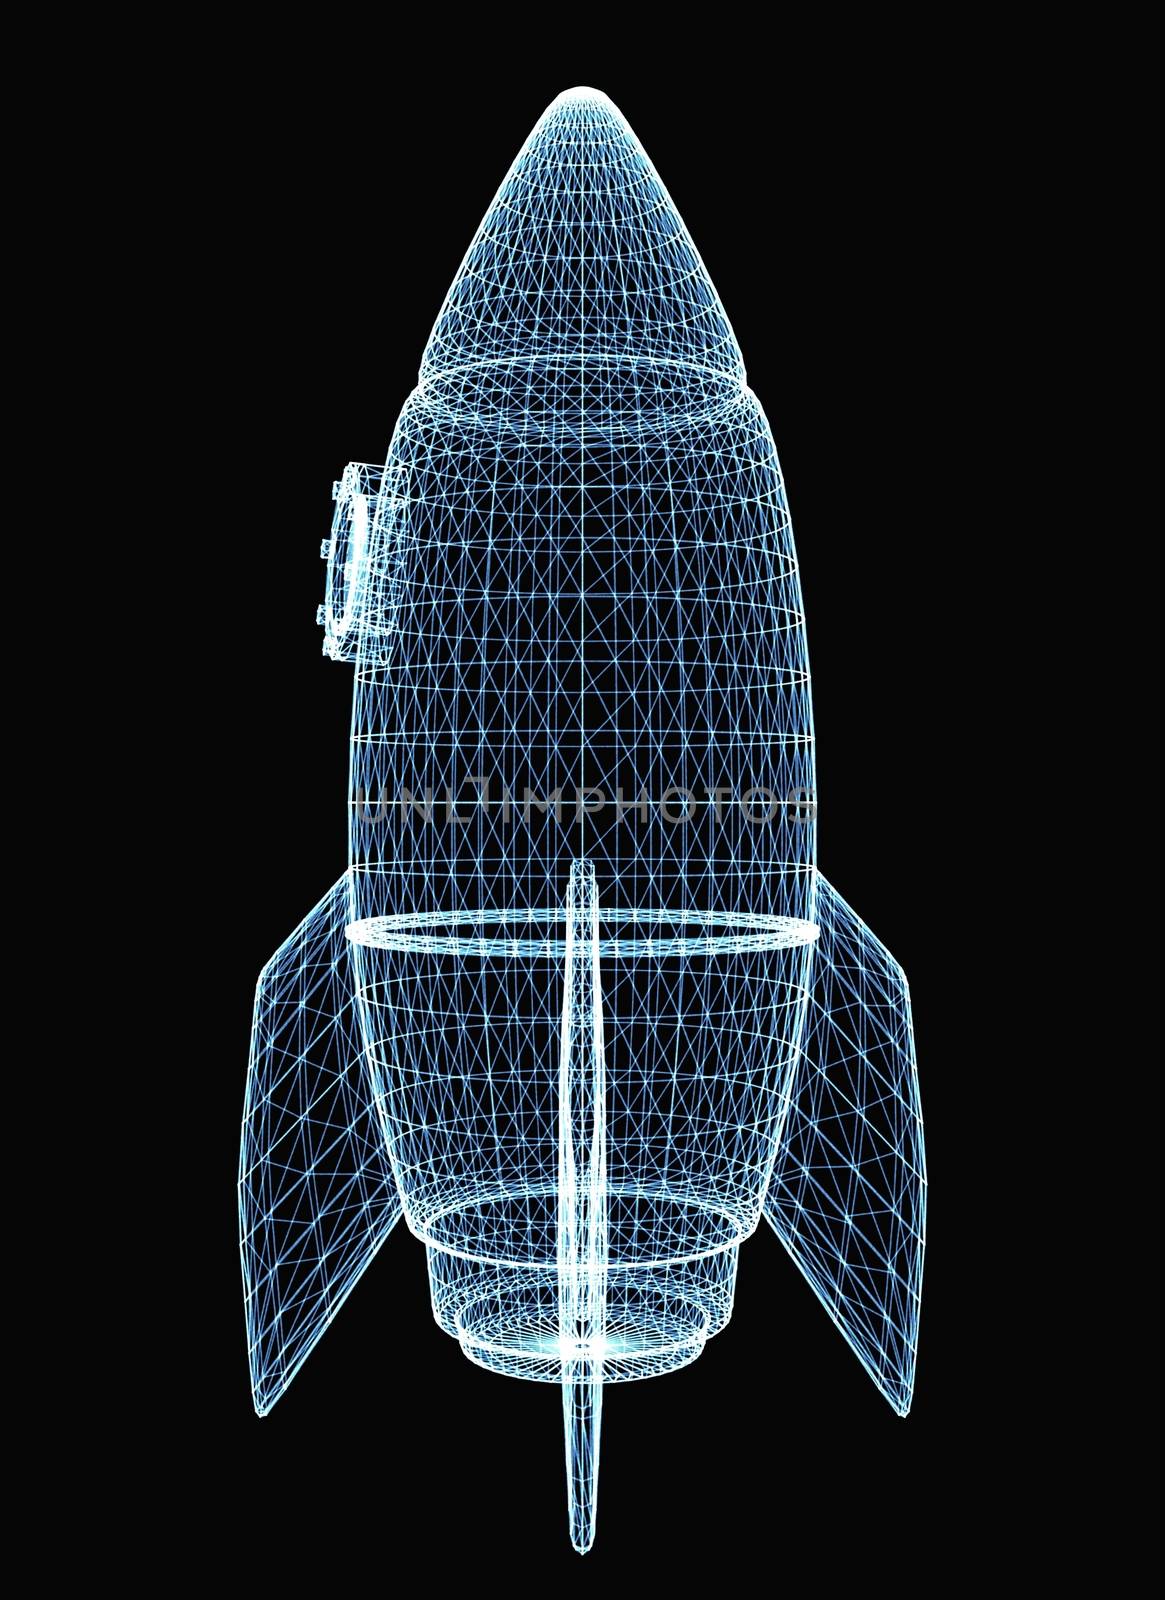 Rocket consisting of luminous lines and dots. 3d illustration on a black background